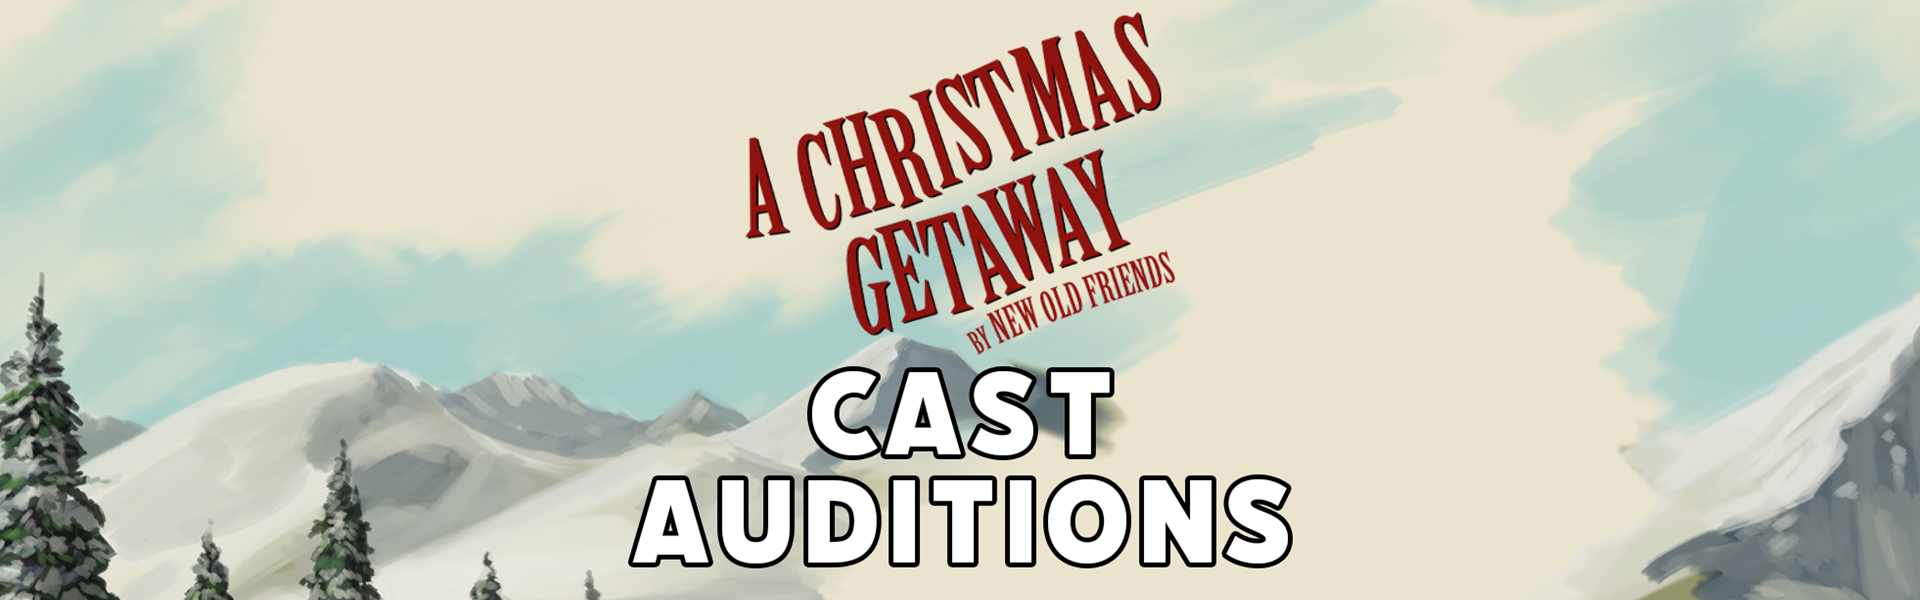 A Christmas Getaway - Cast Auditions